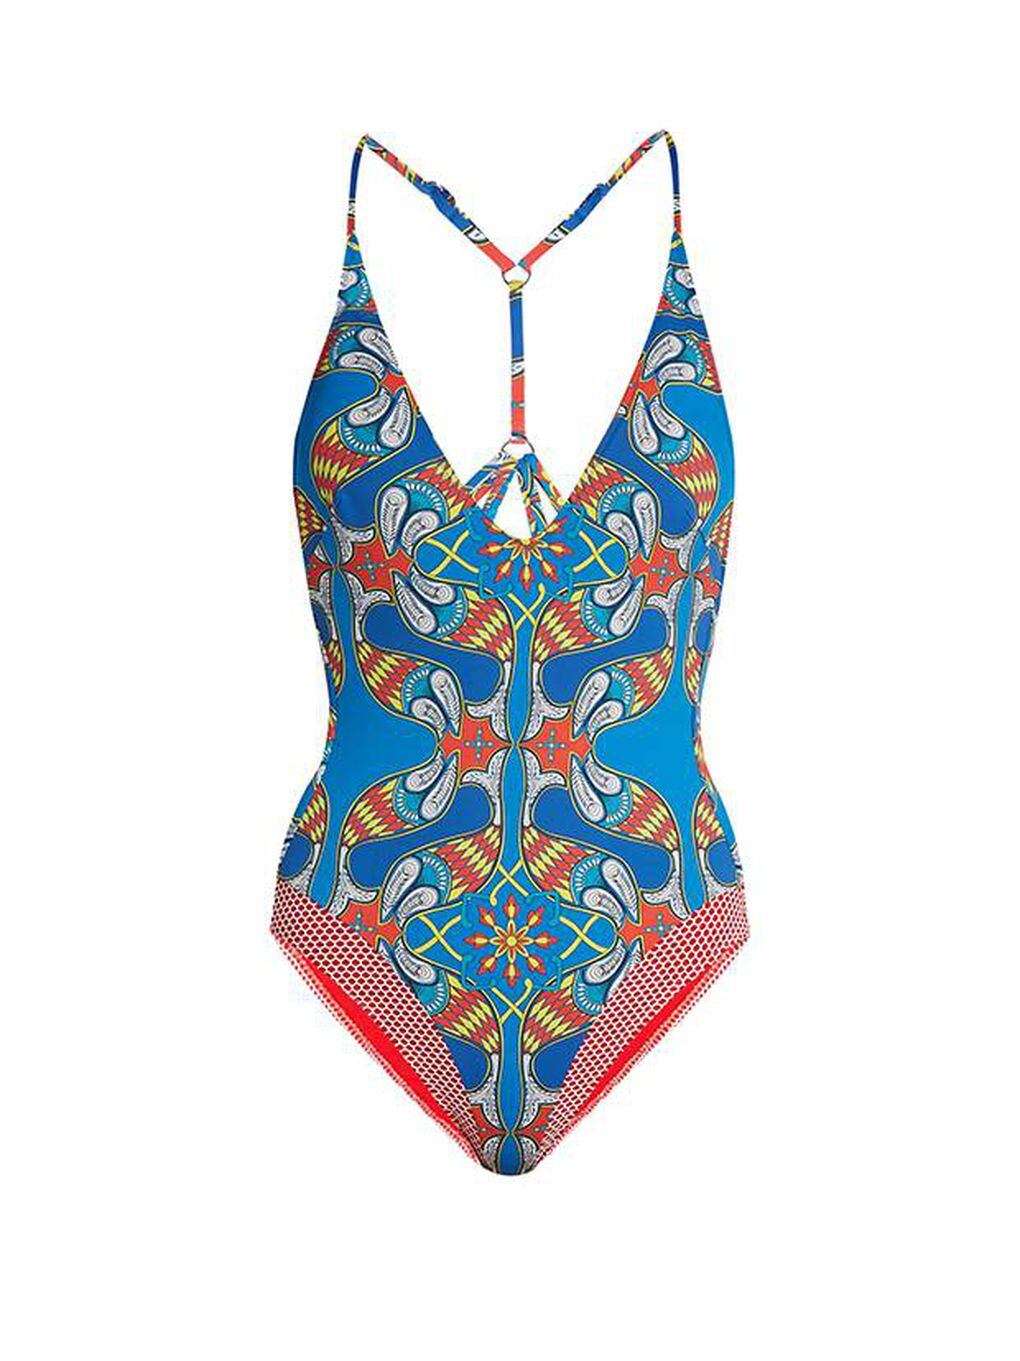 Get beach ready with these hippie-inspired swimsuits - The Globe and Mail